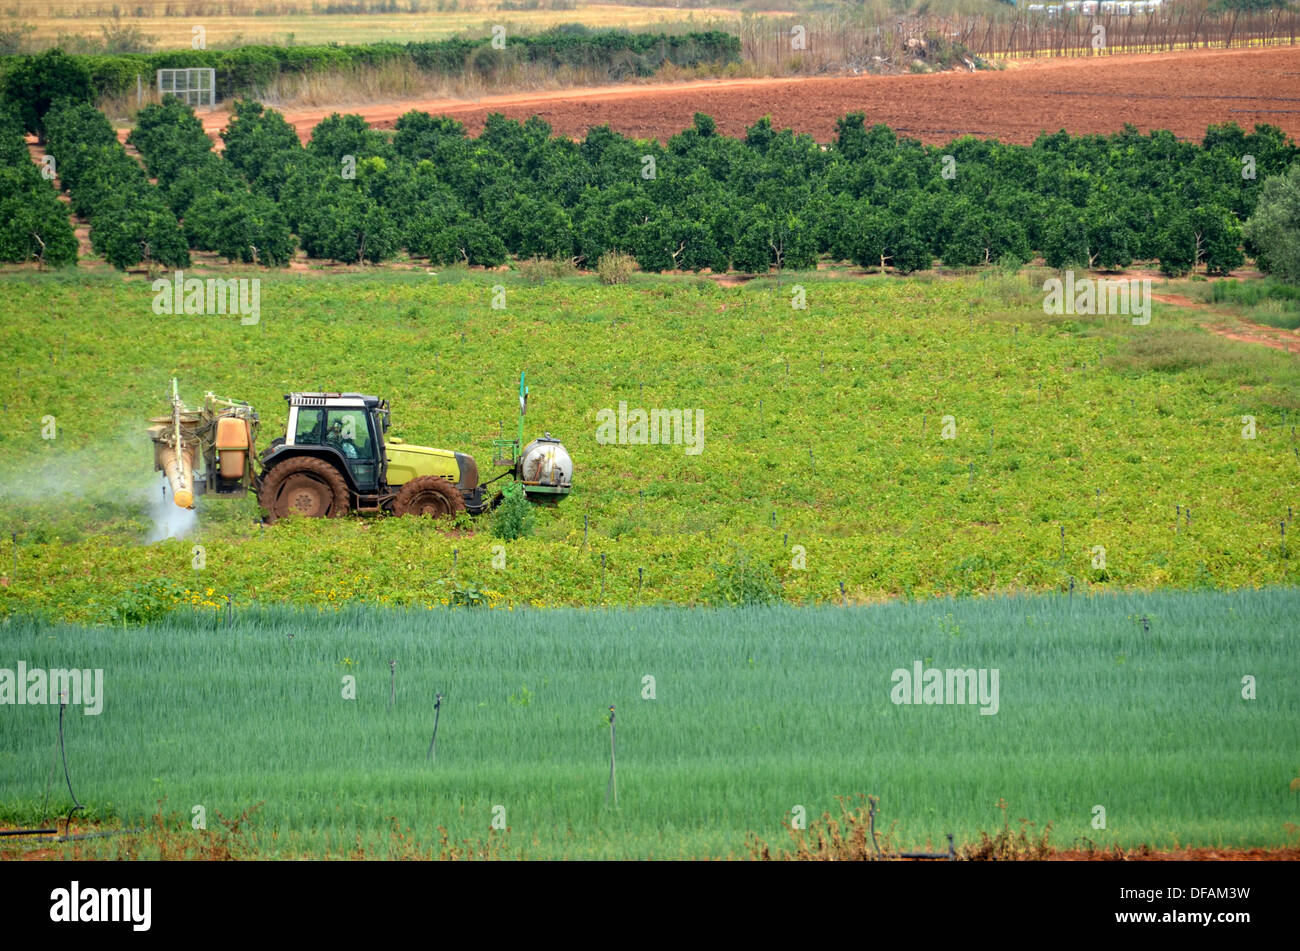 Tractor fumigating a planted field Stock Photo